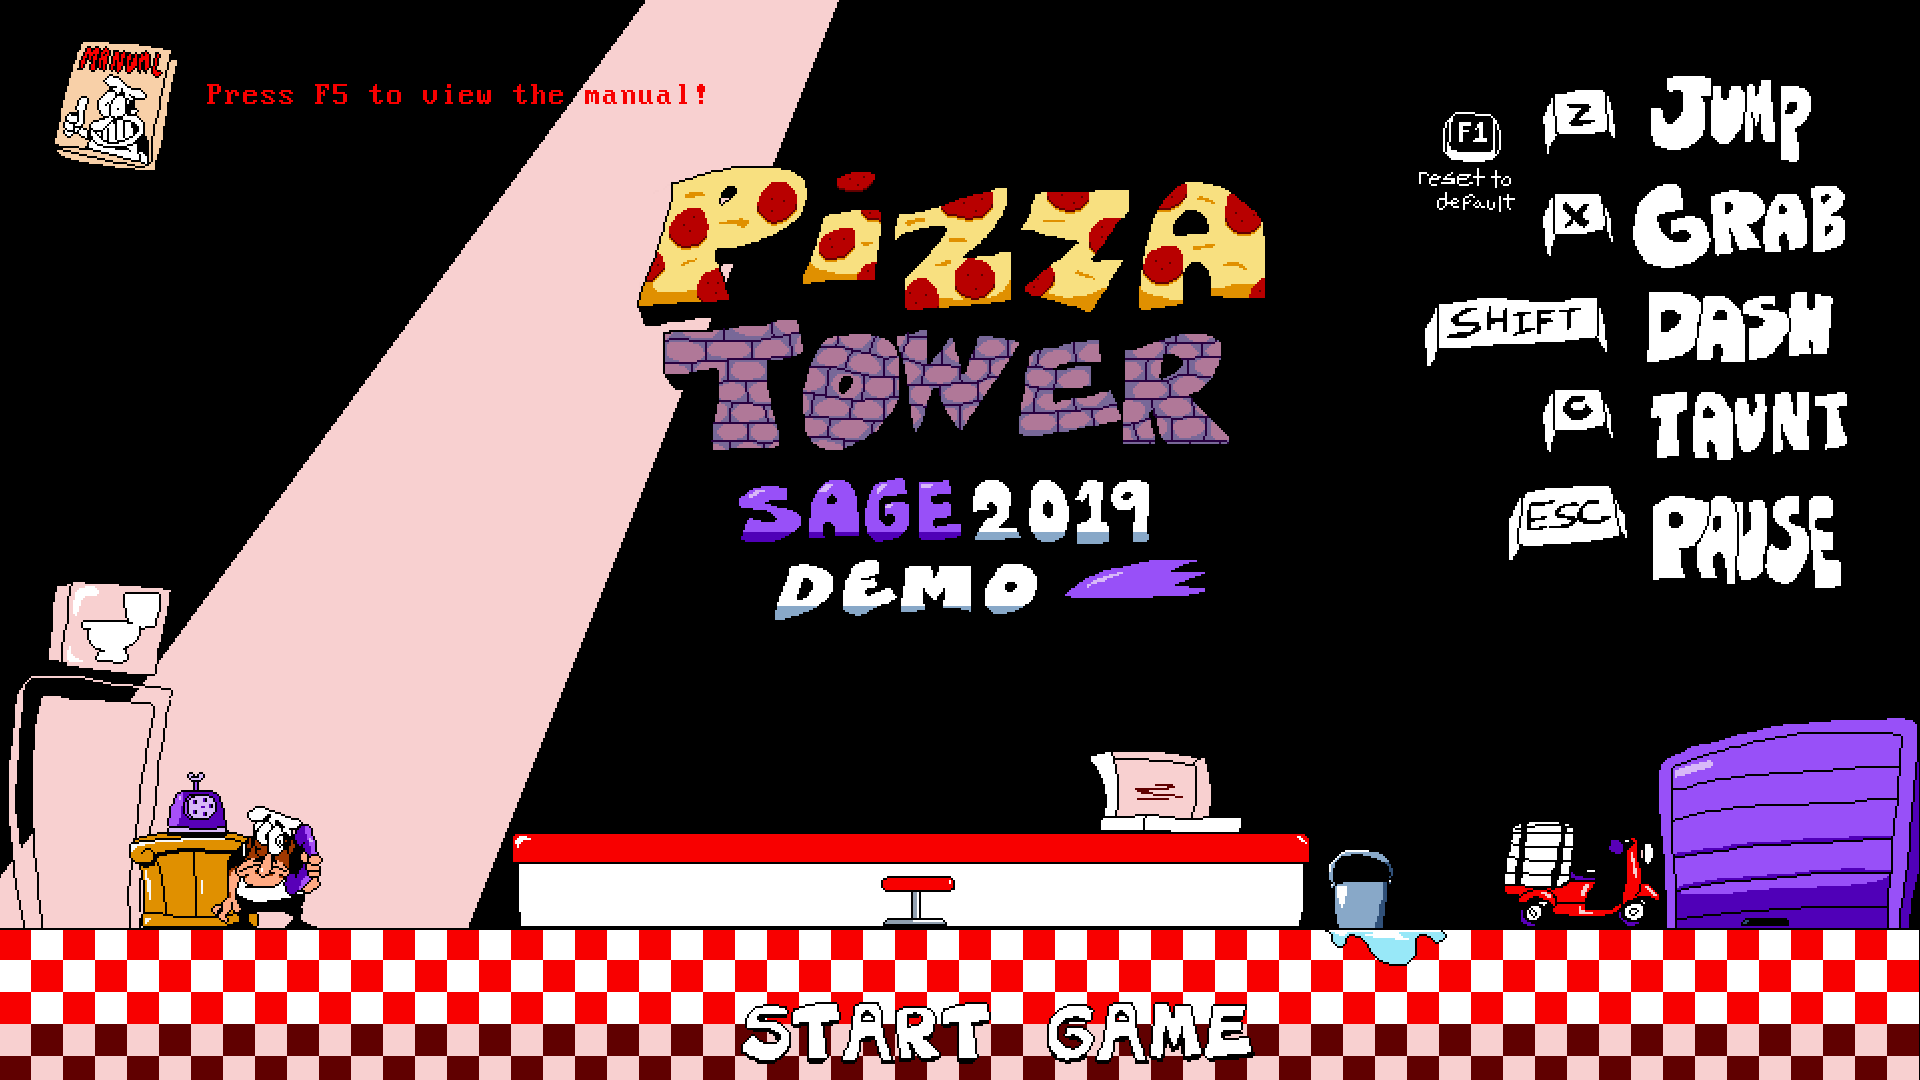 Pizza Tower demo's title screen.